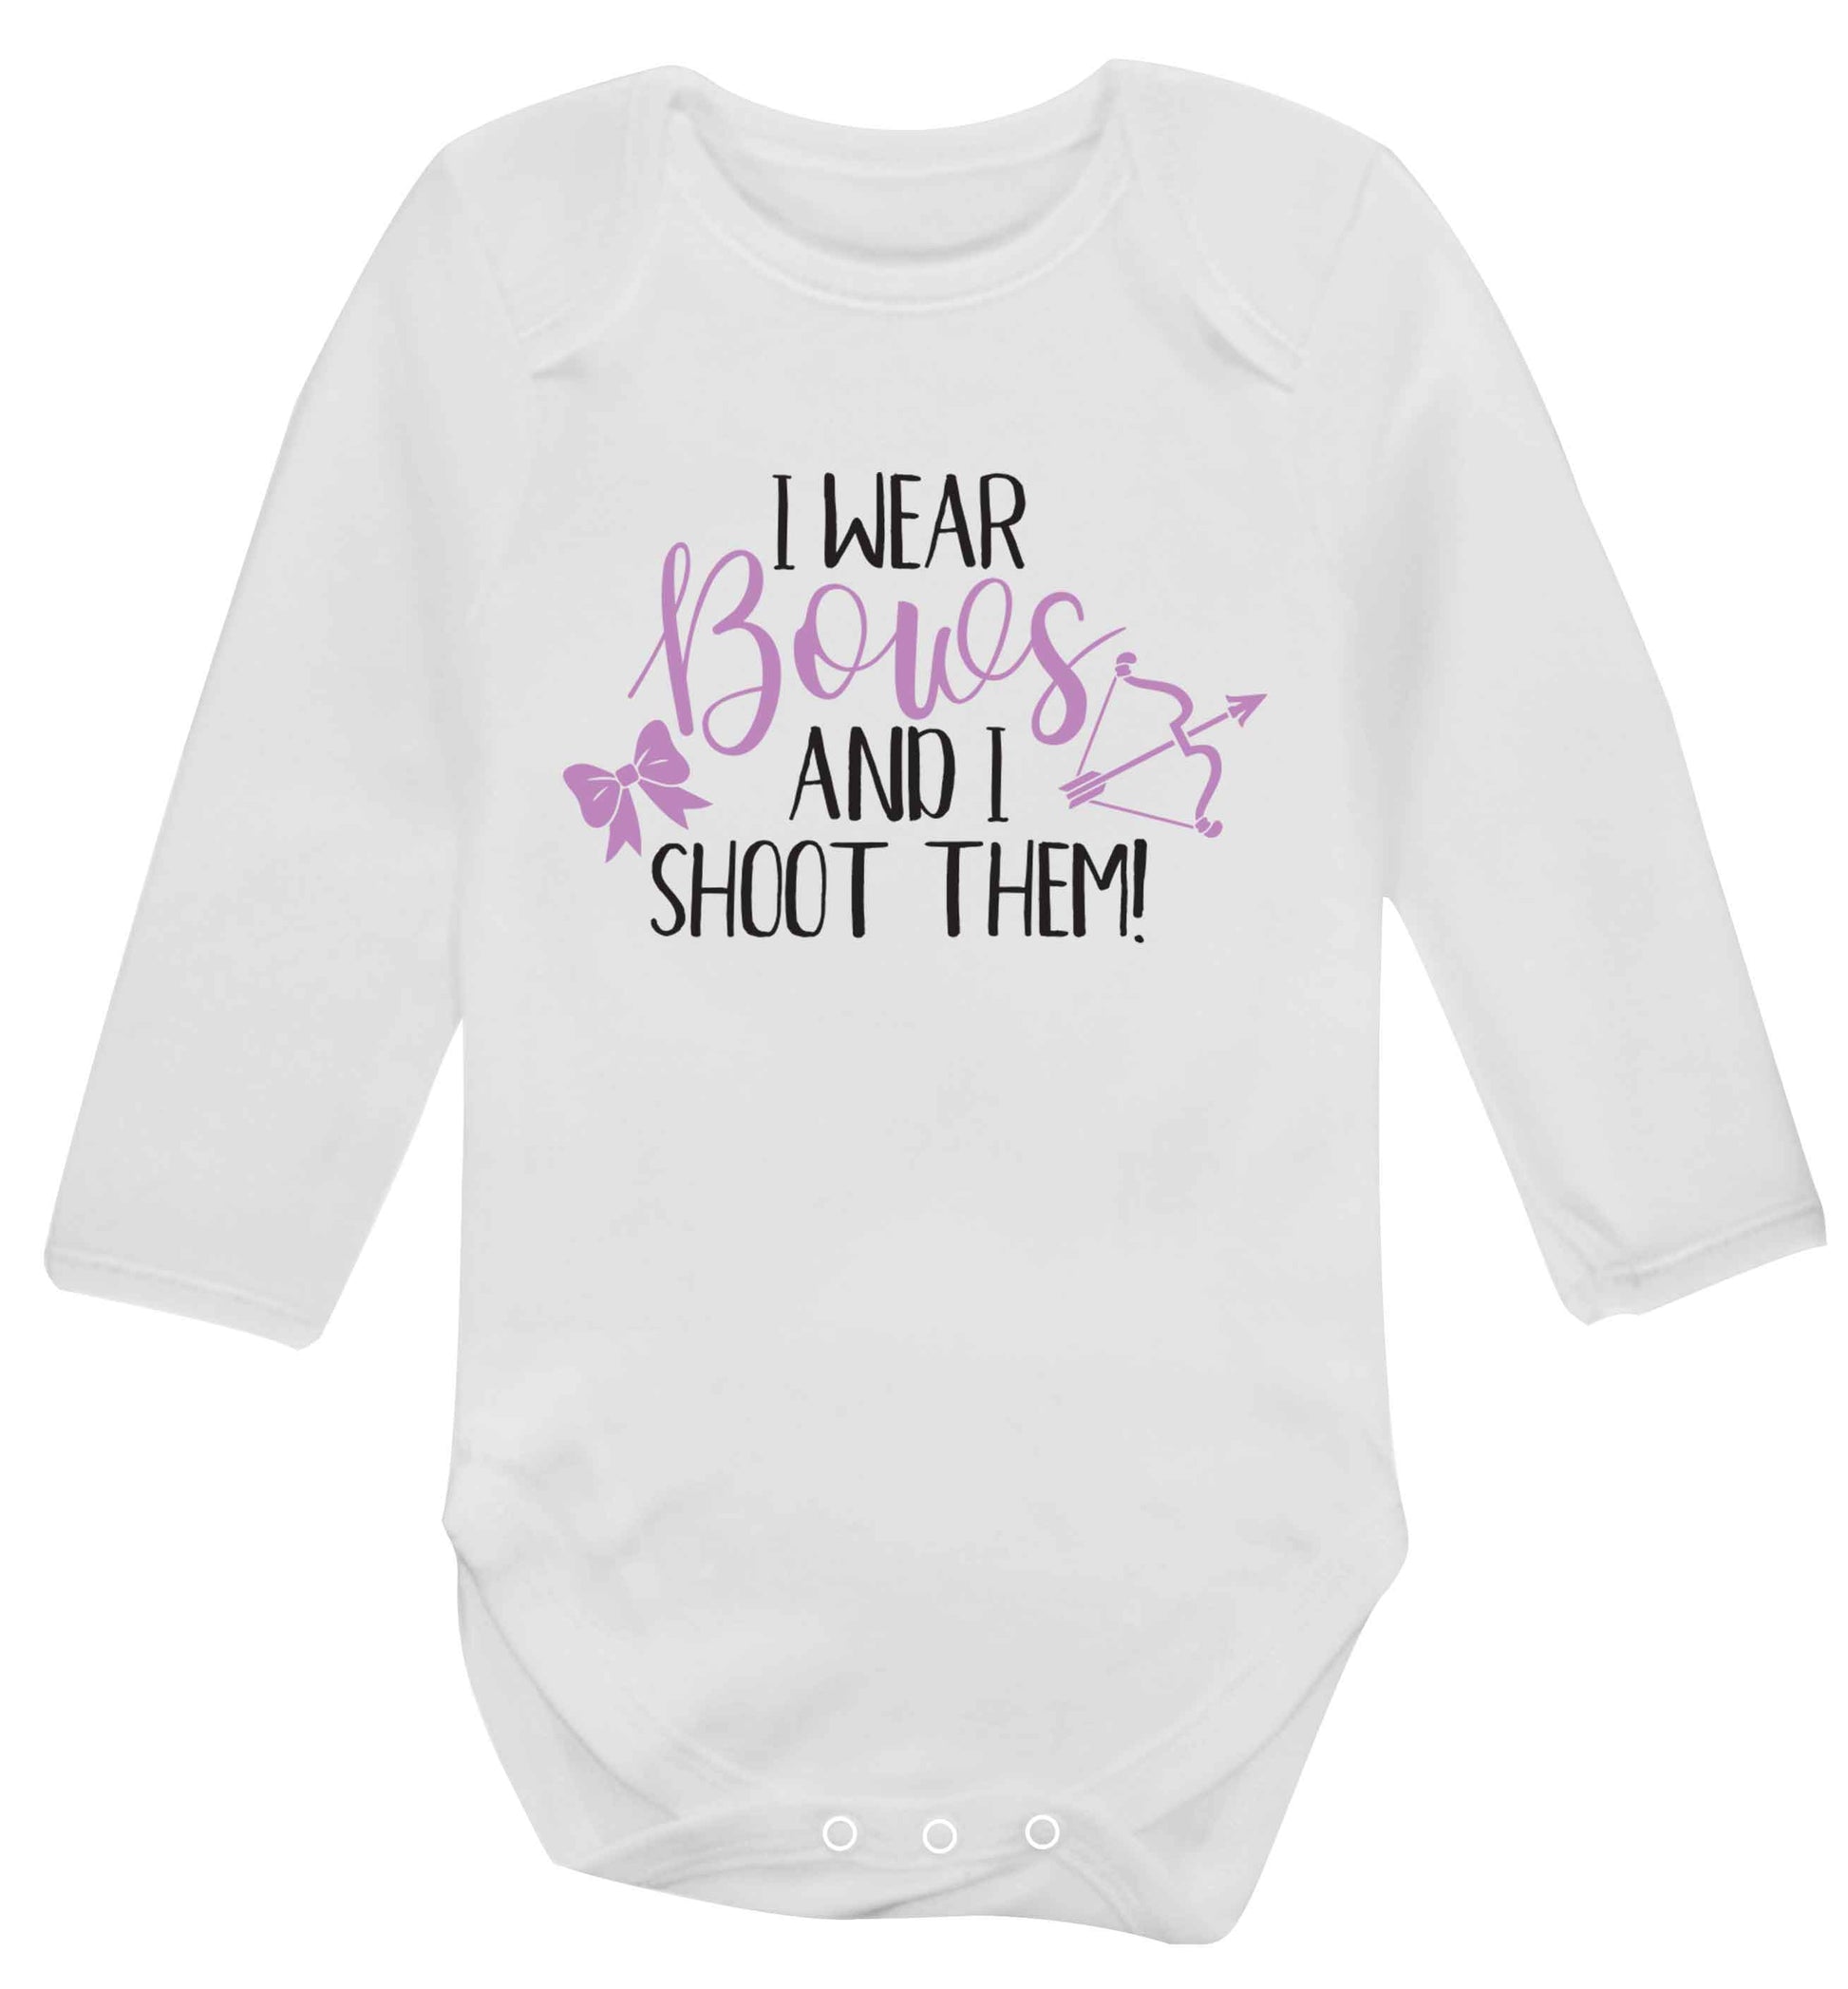 I wear bows and I shoot them Baby Vest long sleeved white 6-12 months